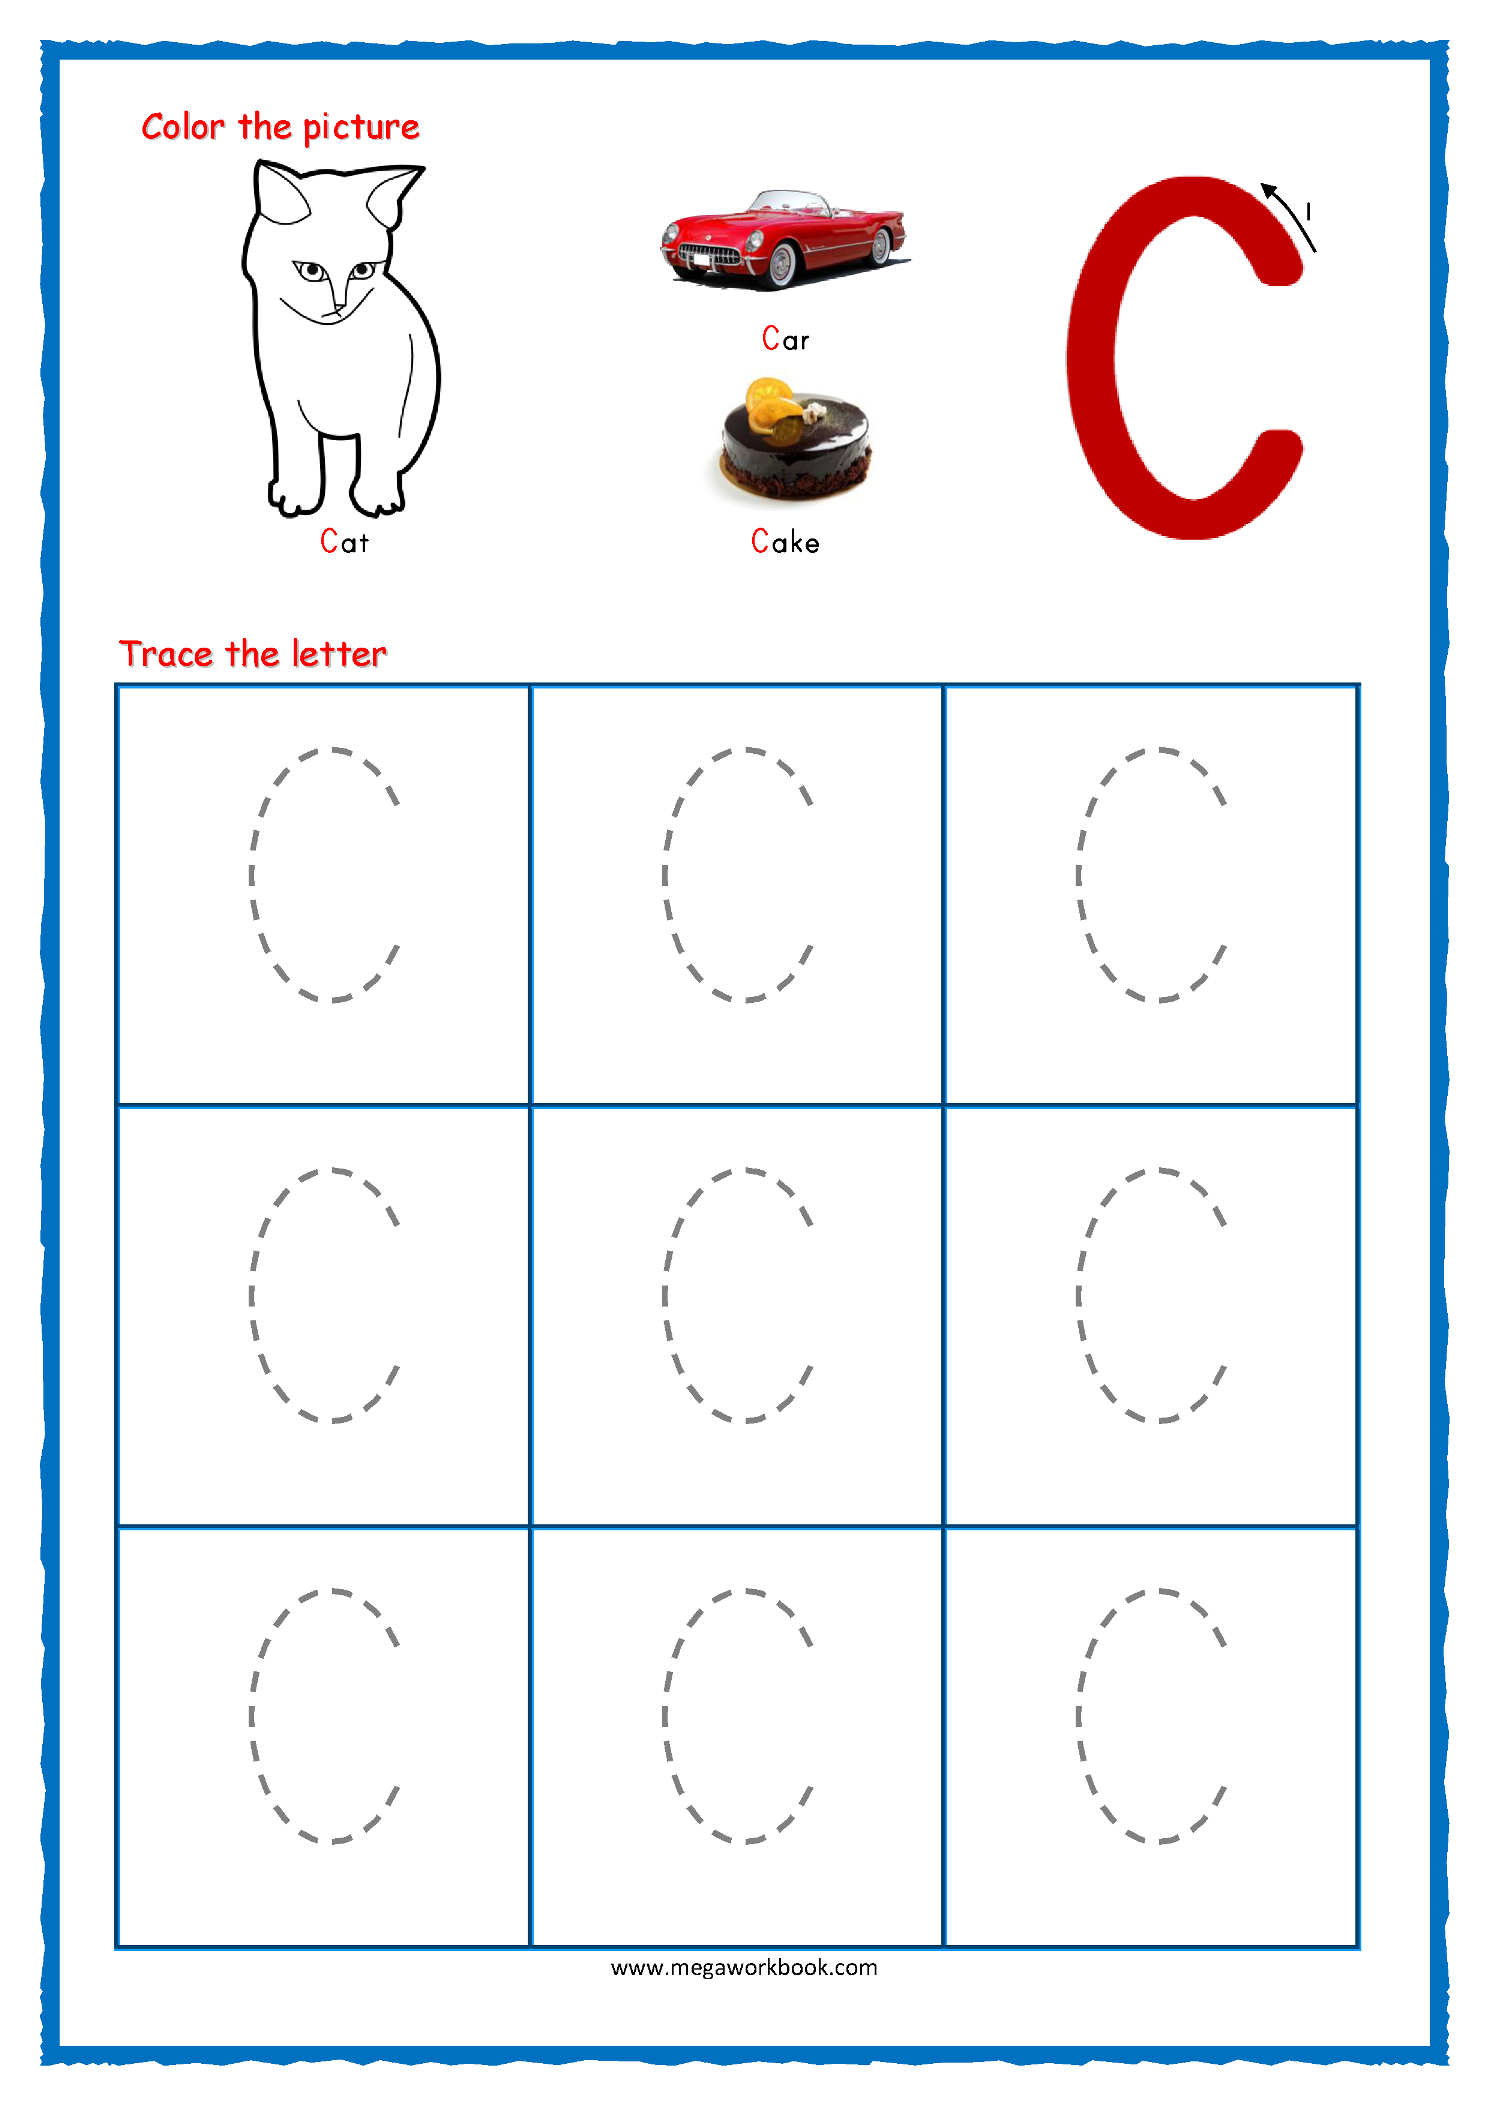 Tracing Letters - Alphabet Tracing - Capital Letters throughout Tracing Letters Worksheet Printable Free